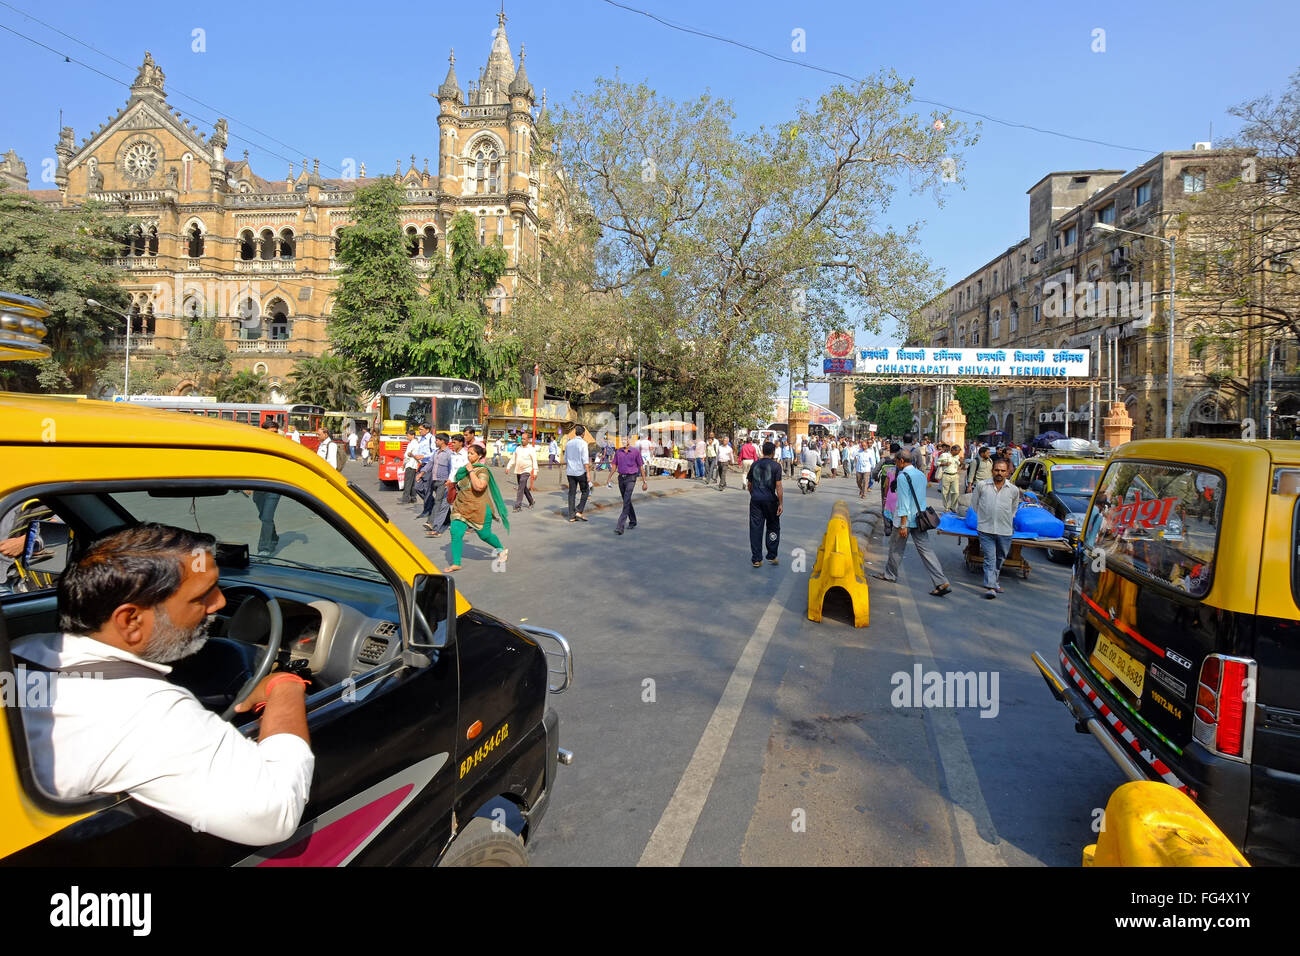 Taxis outside the Railway station Chhatrapati Shivaji Terminus (CST) , formerly known as Victoria Terminus, one of Mumbai's most famous buildings Stock Photo